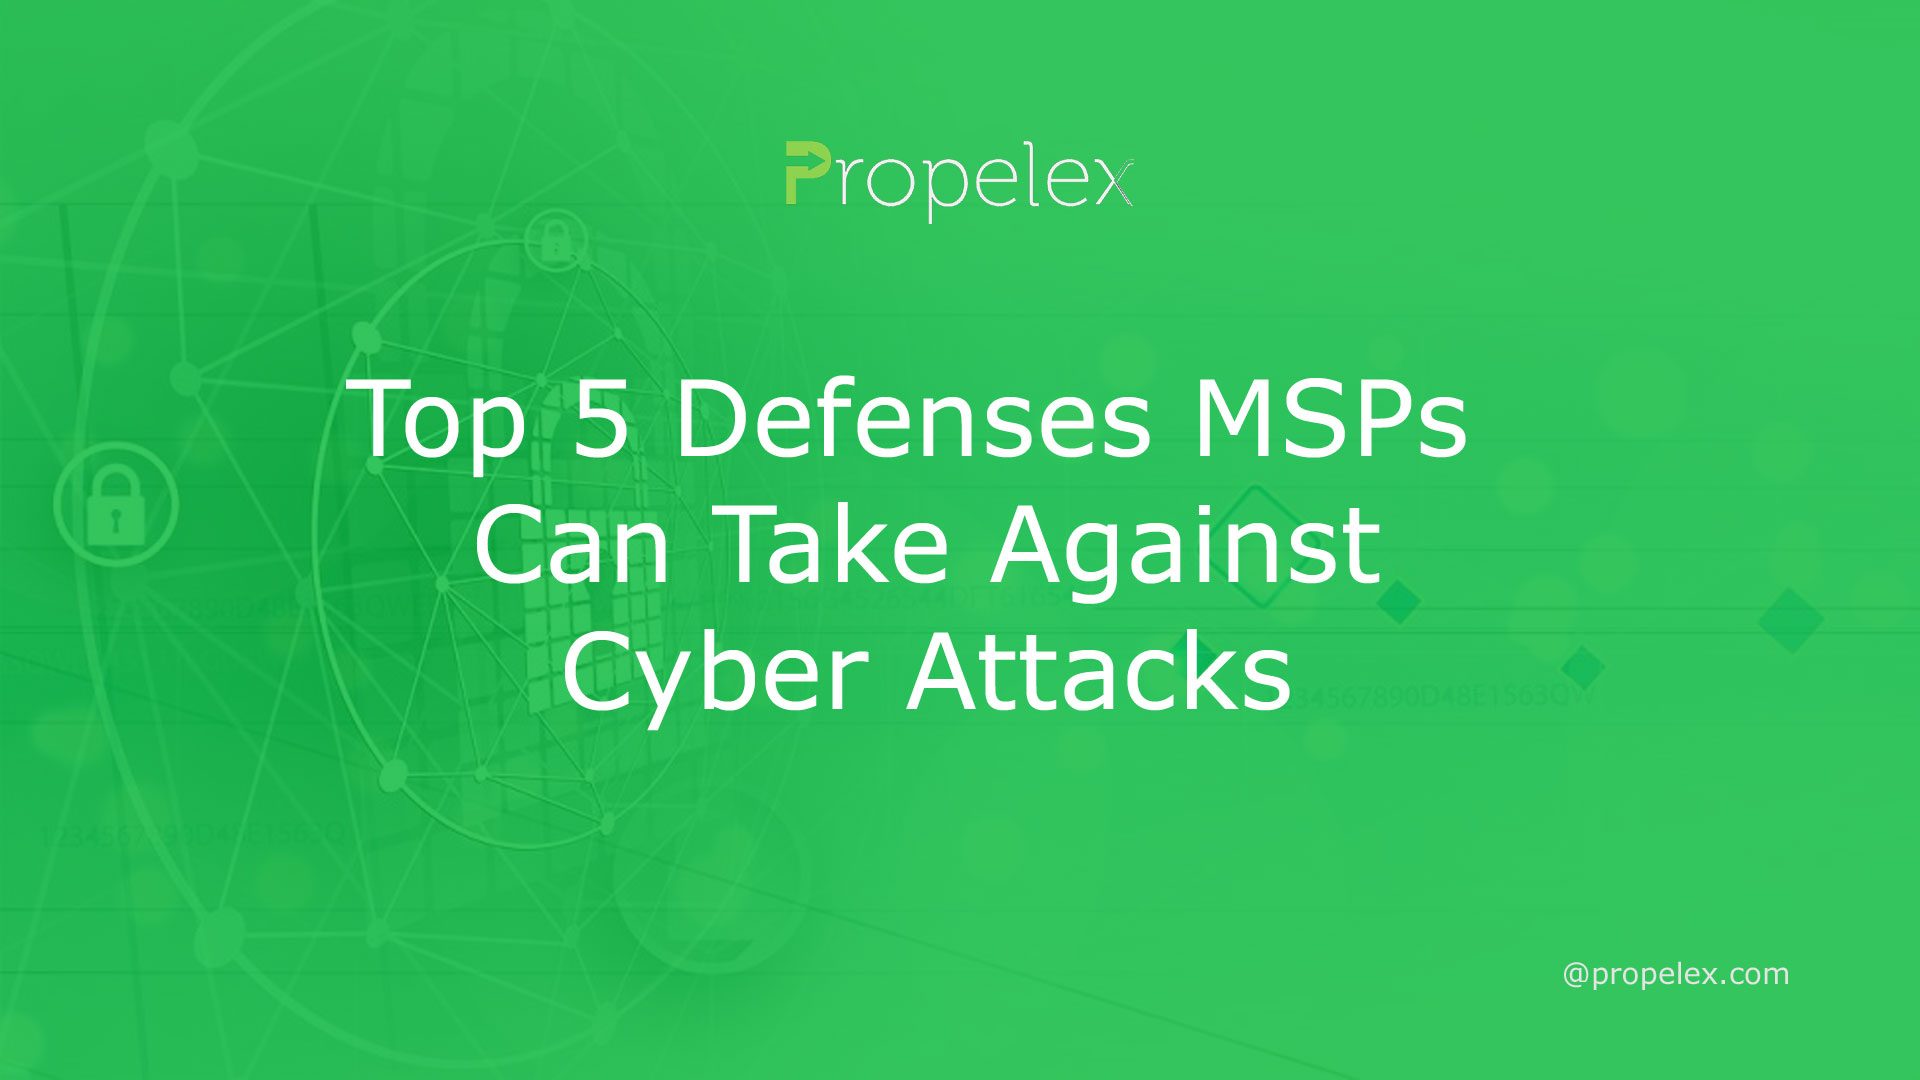 Top 5 Defenses MSPs Can Take Against Cyber Attacks